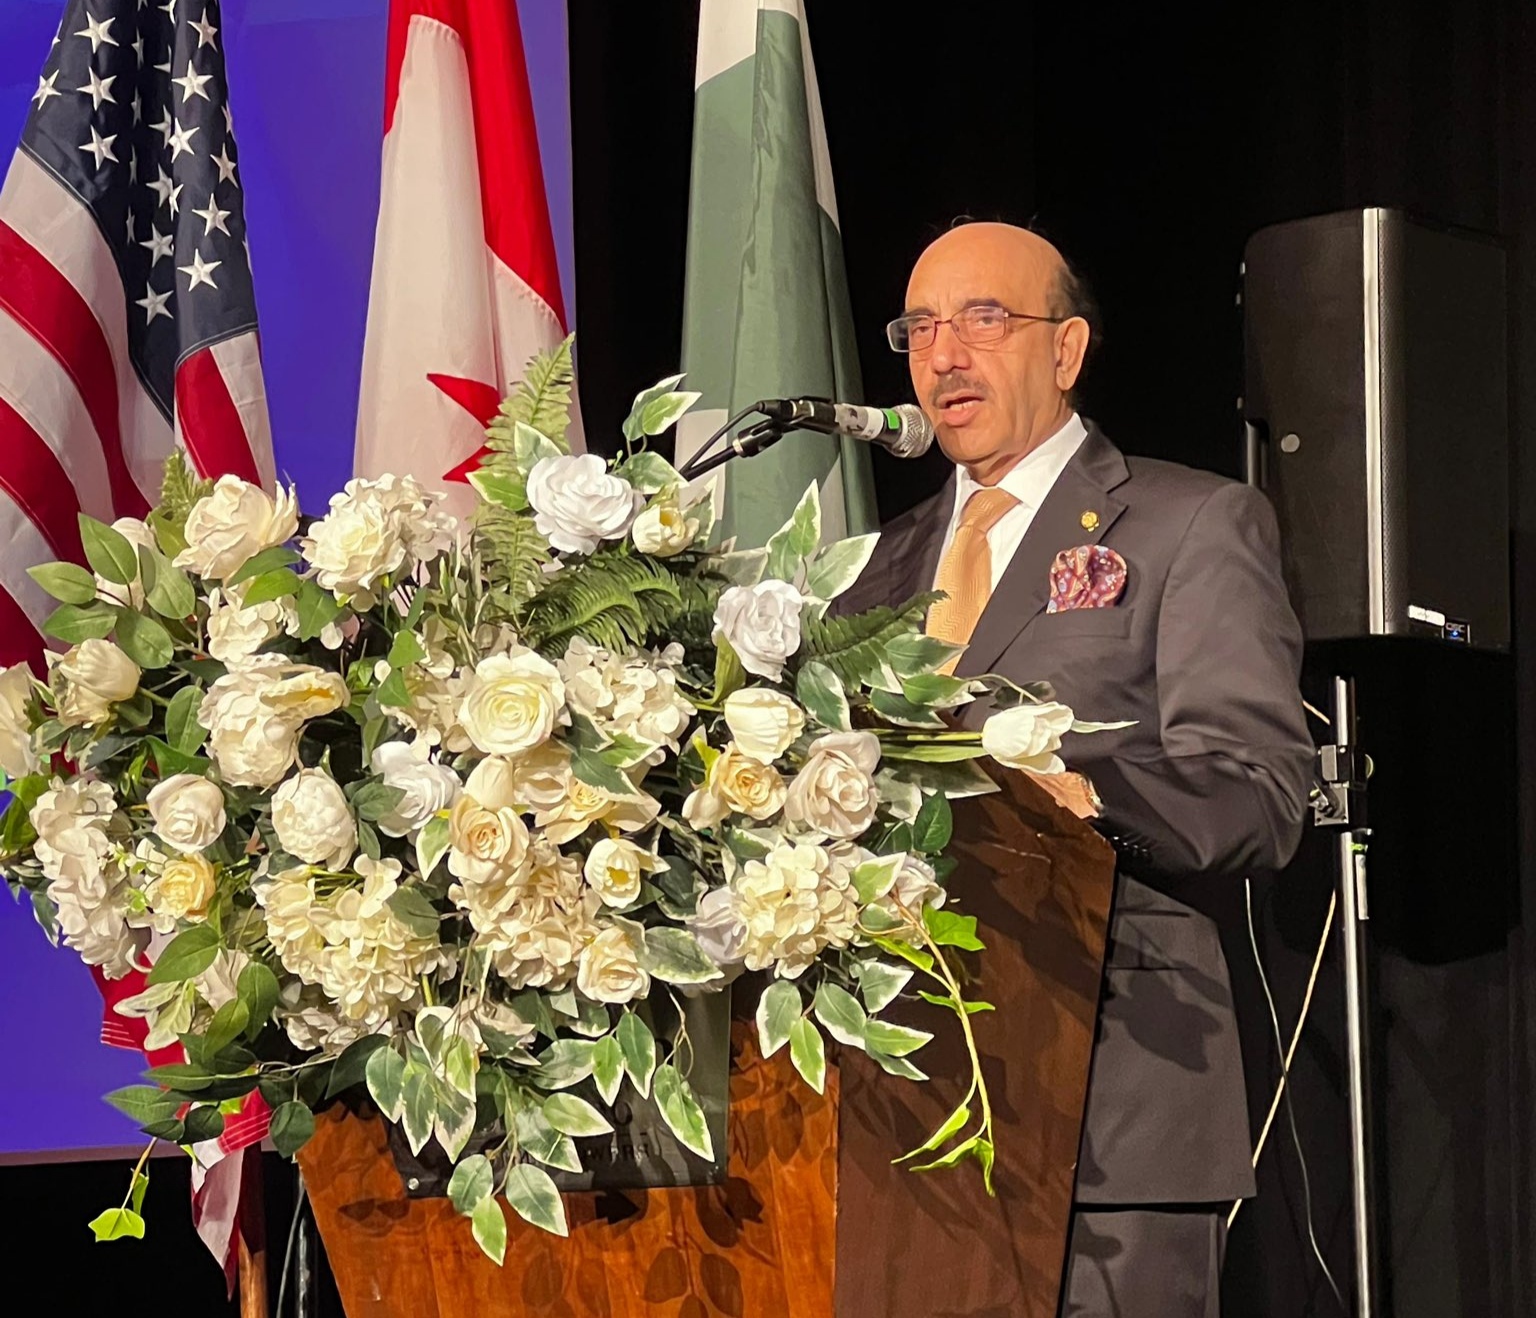 Masood Khan hails Pakistani-American physicians role in upgrading Pakistan’s healthcare system; also urges Gaza ceasefire